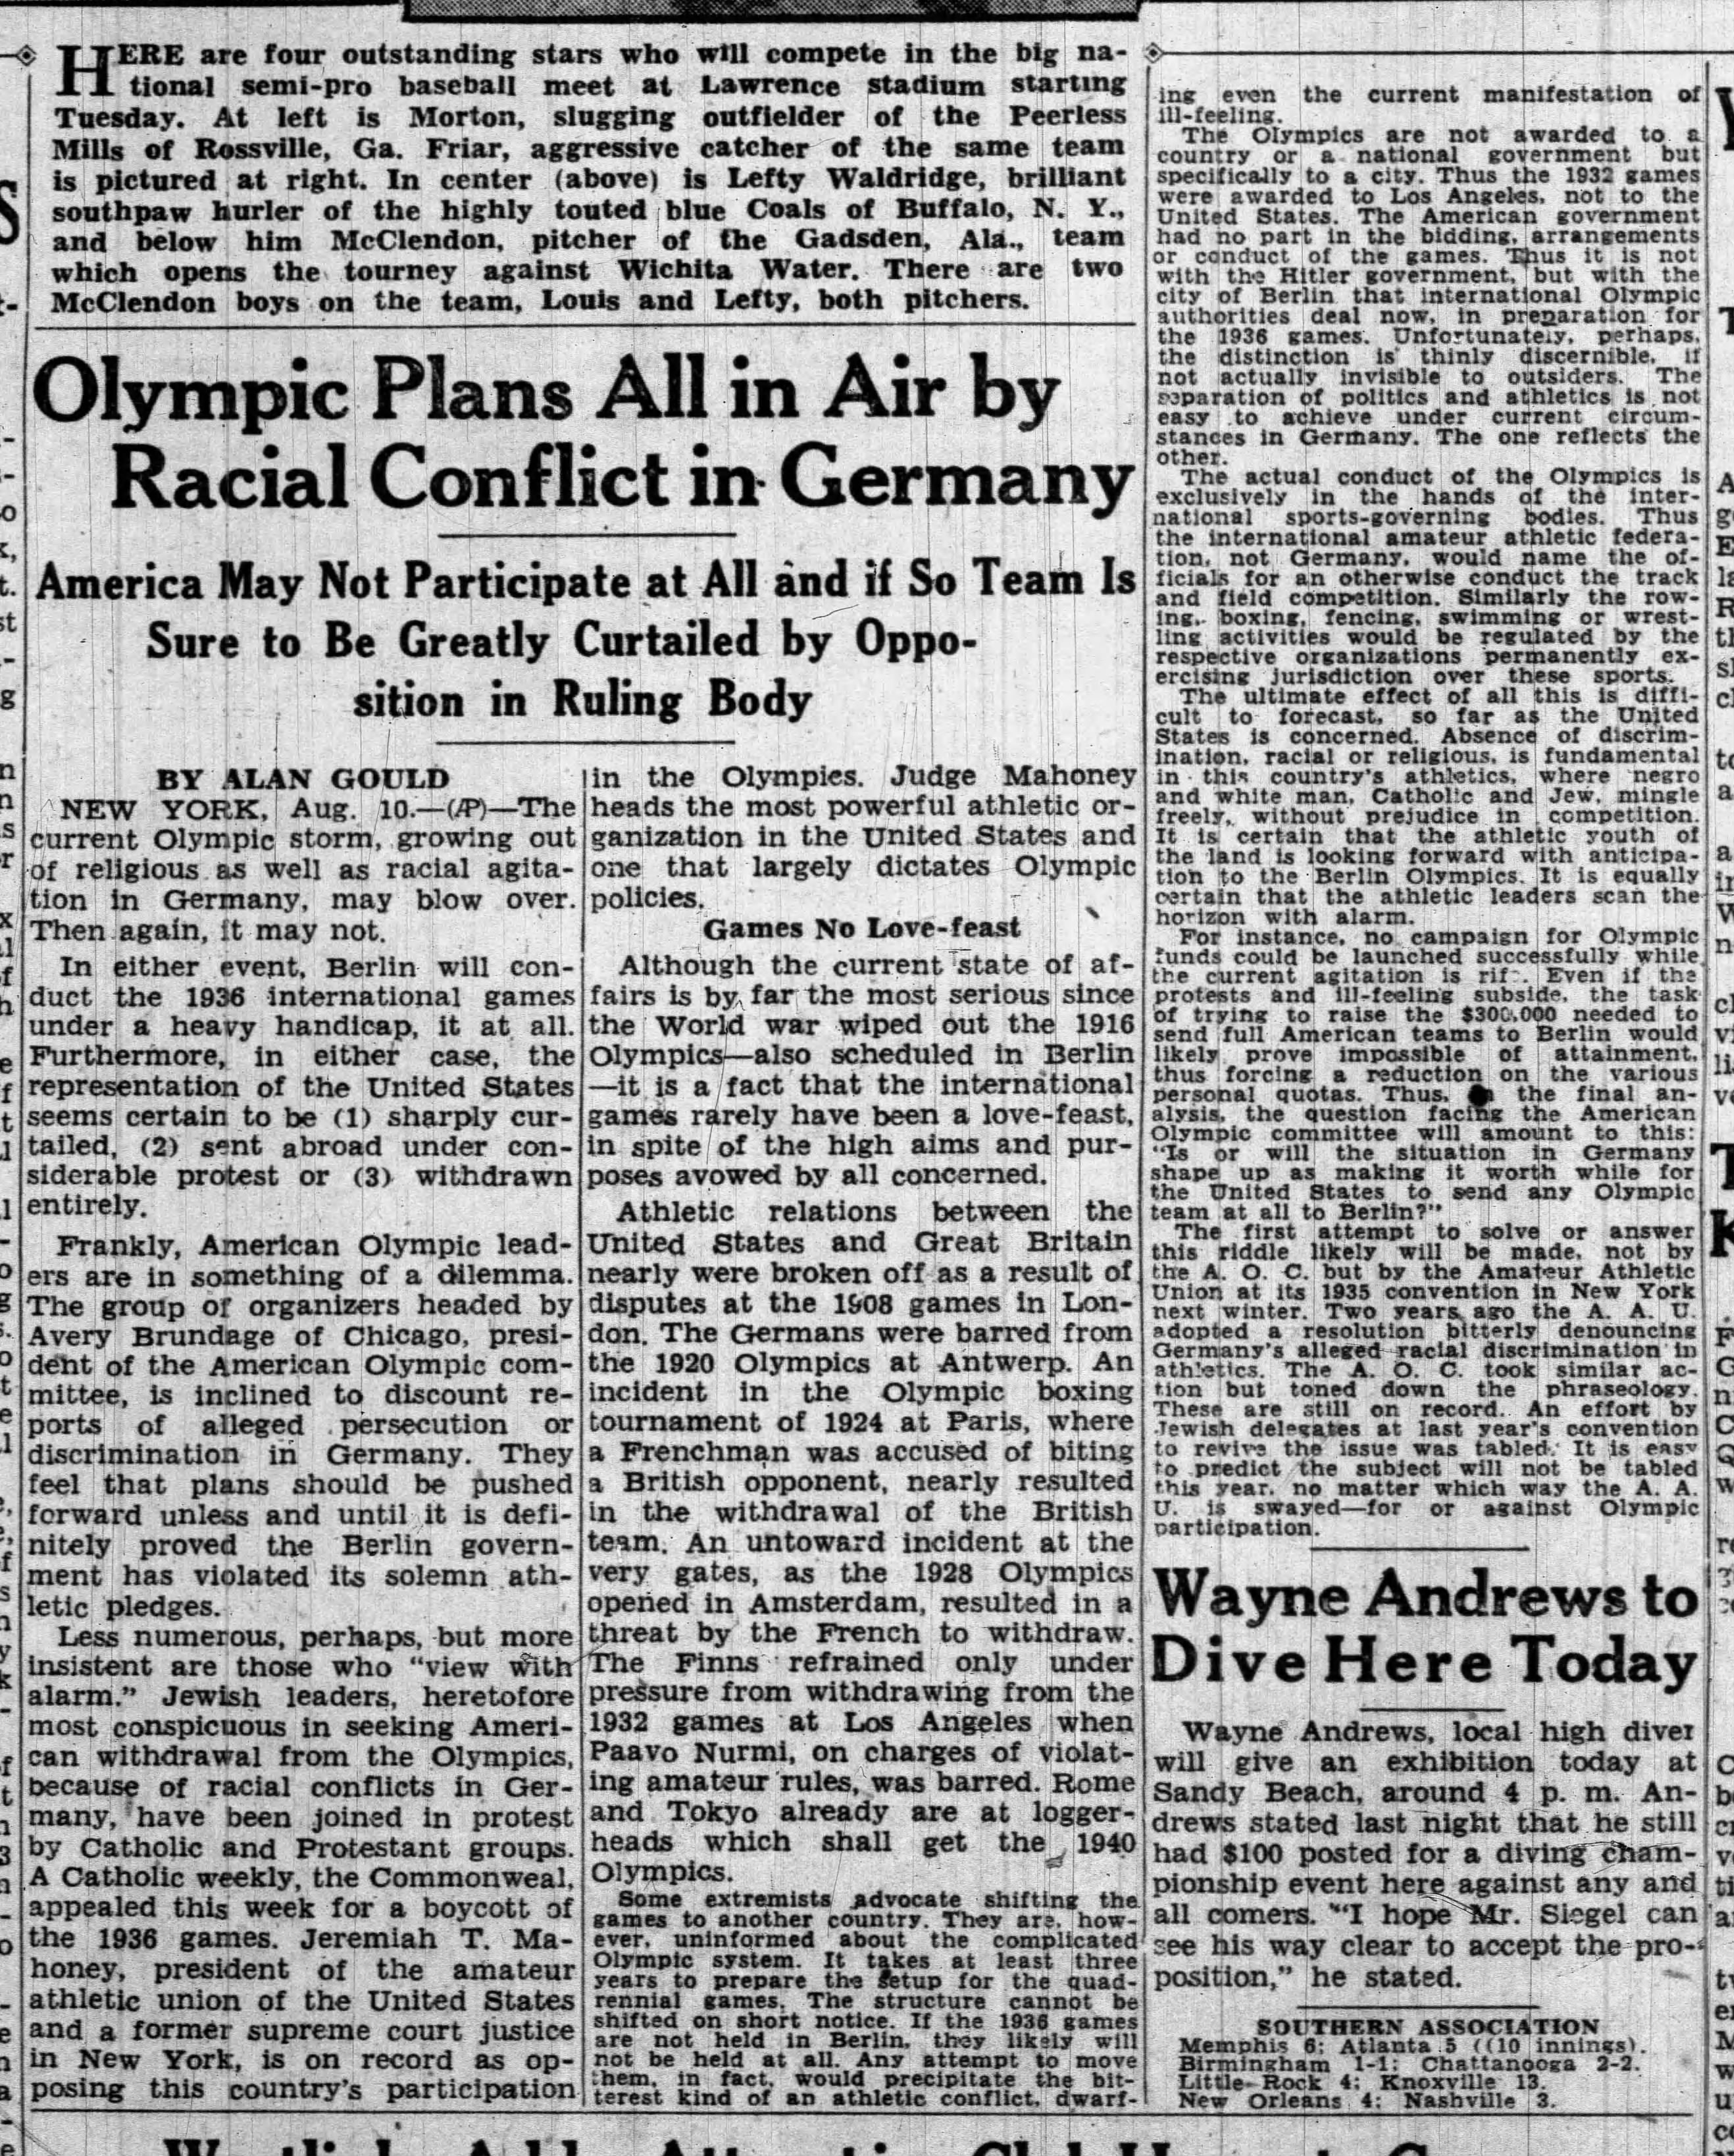 Olympic Plans All in Air by Racial Conflict in Germany